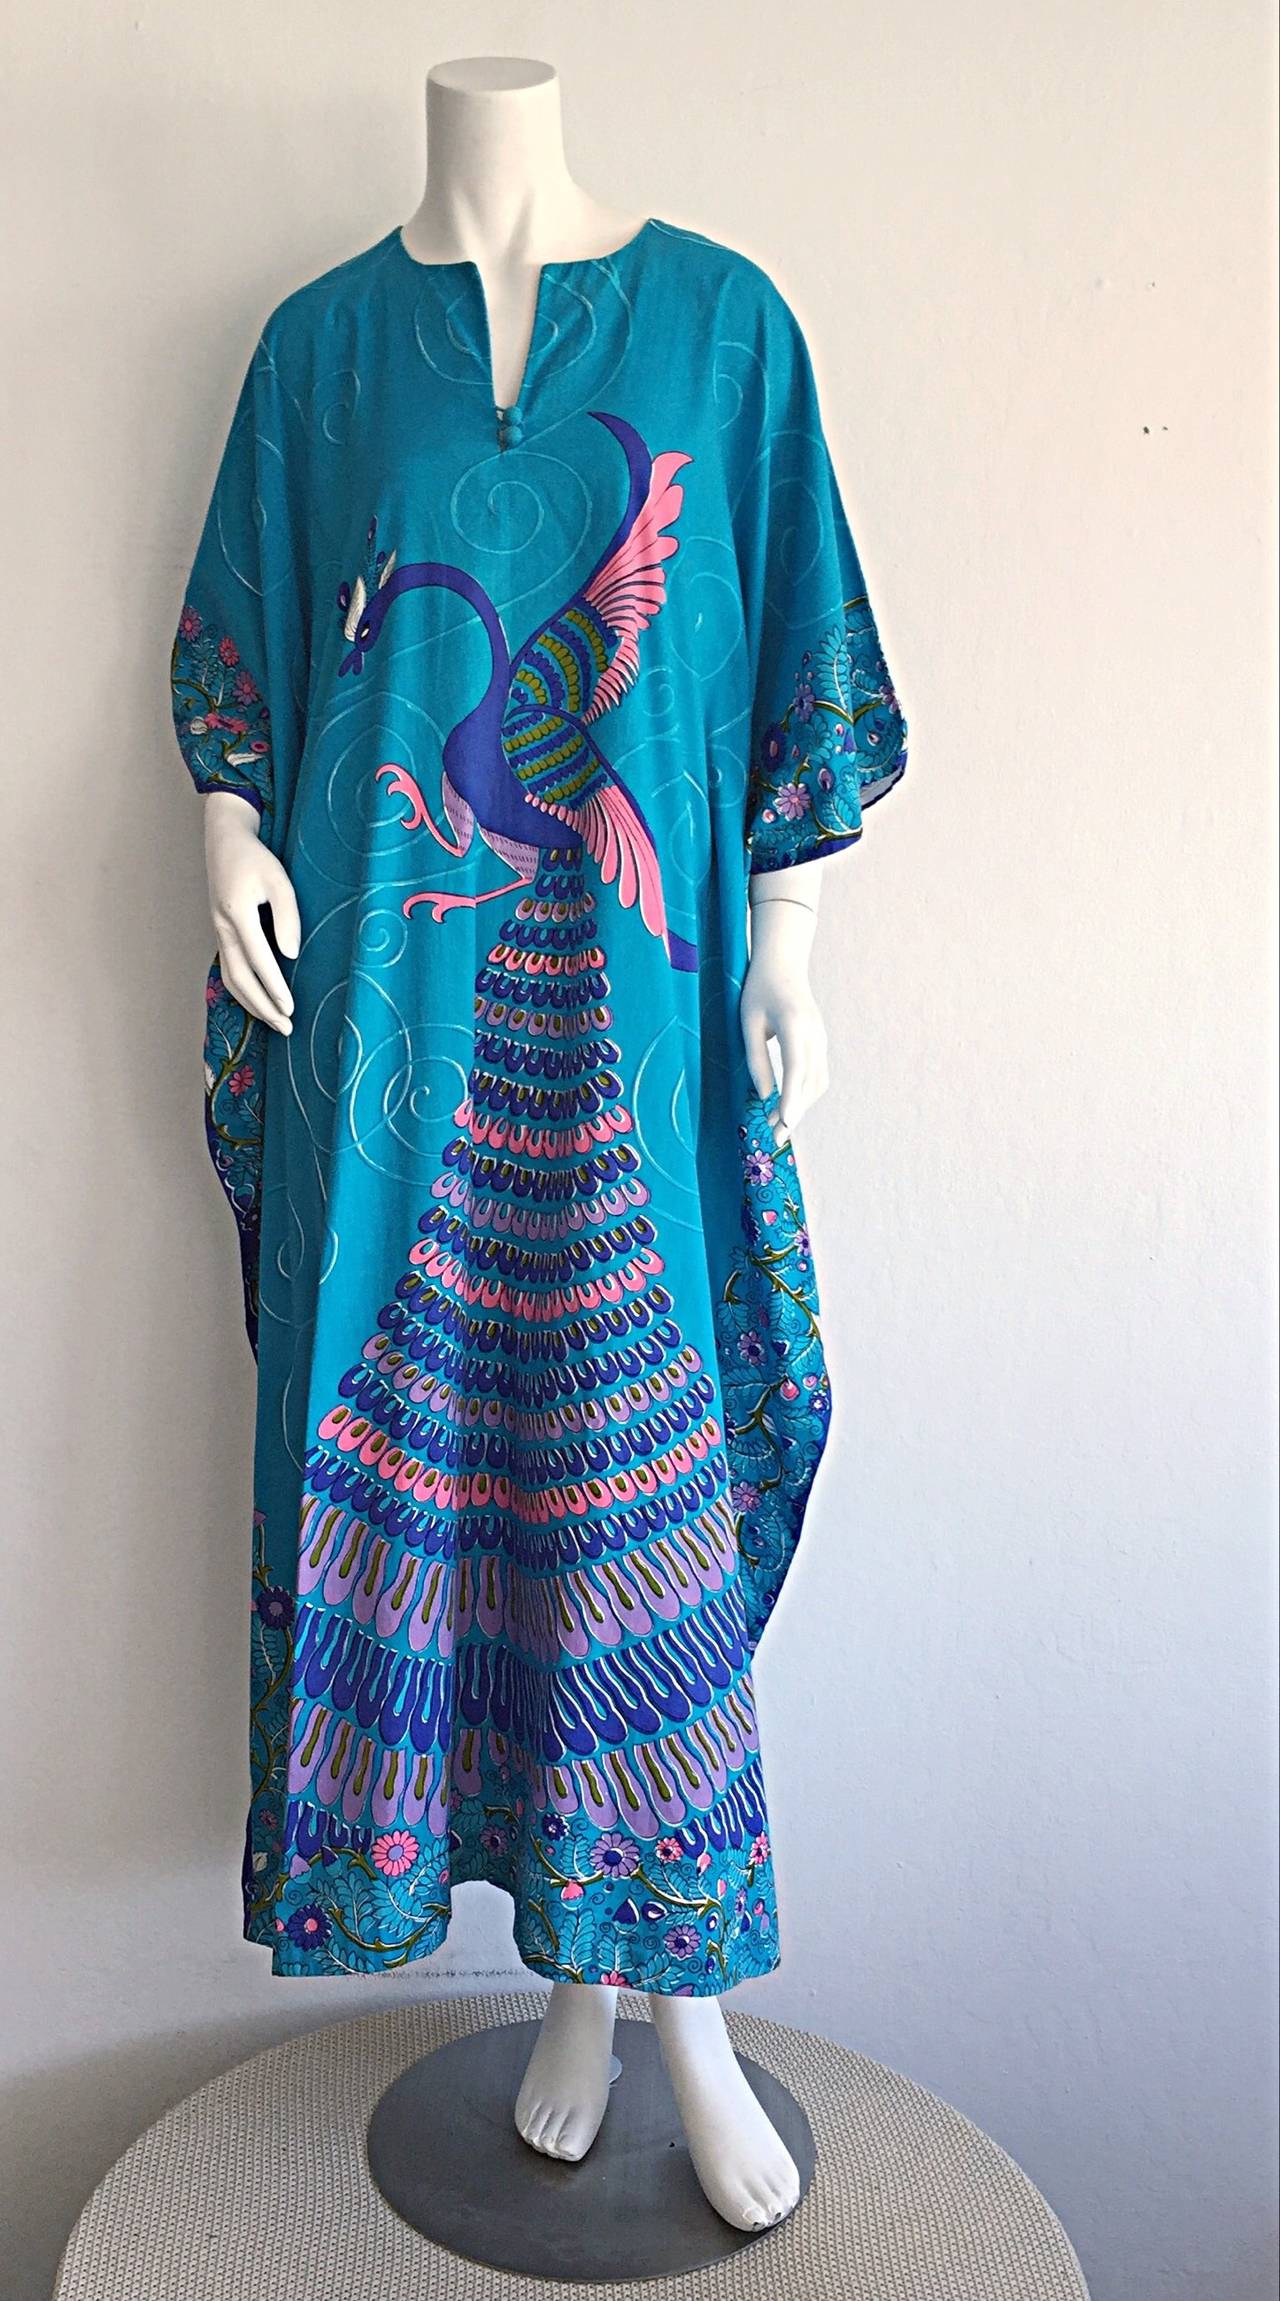 Incredible vintage Neiman Marcus Peacock cotton caftan. Vibrant blue, with colorful print throughout. Buttons at bust. A true caftan that is a rare gem! Looks great alone, or belted. Perfect over a swimsuit. In great condition. Will fit most